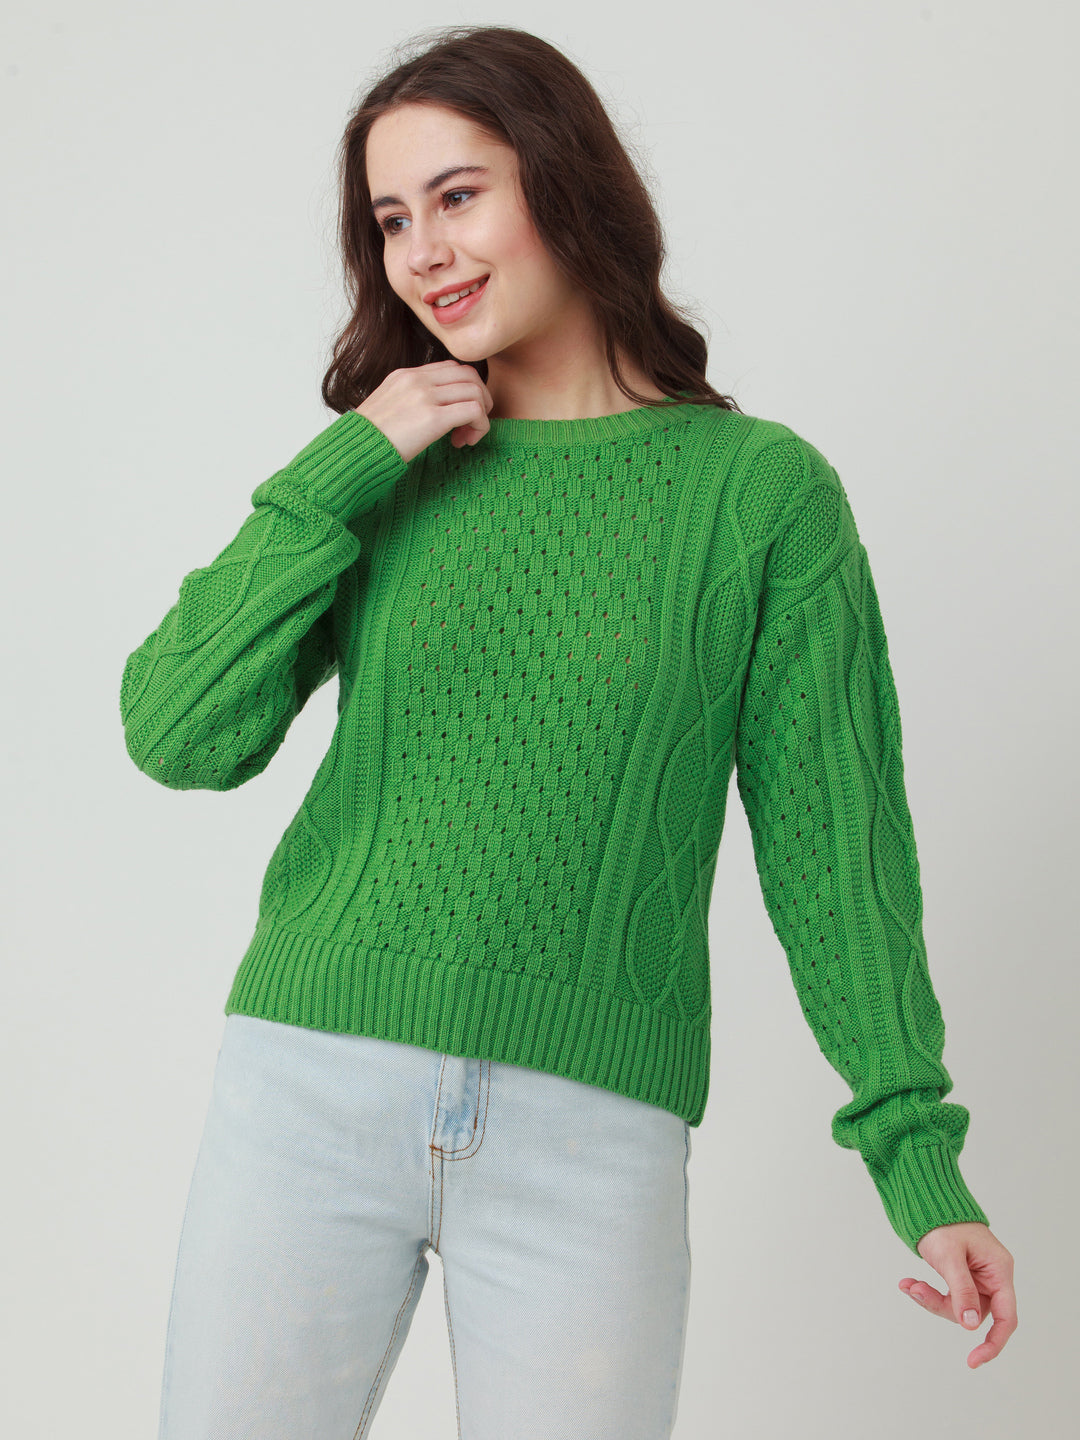 Green Solid Cropped Sweater For Women